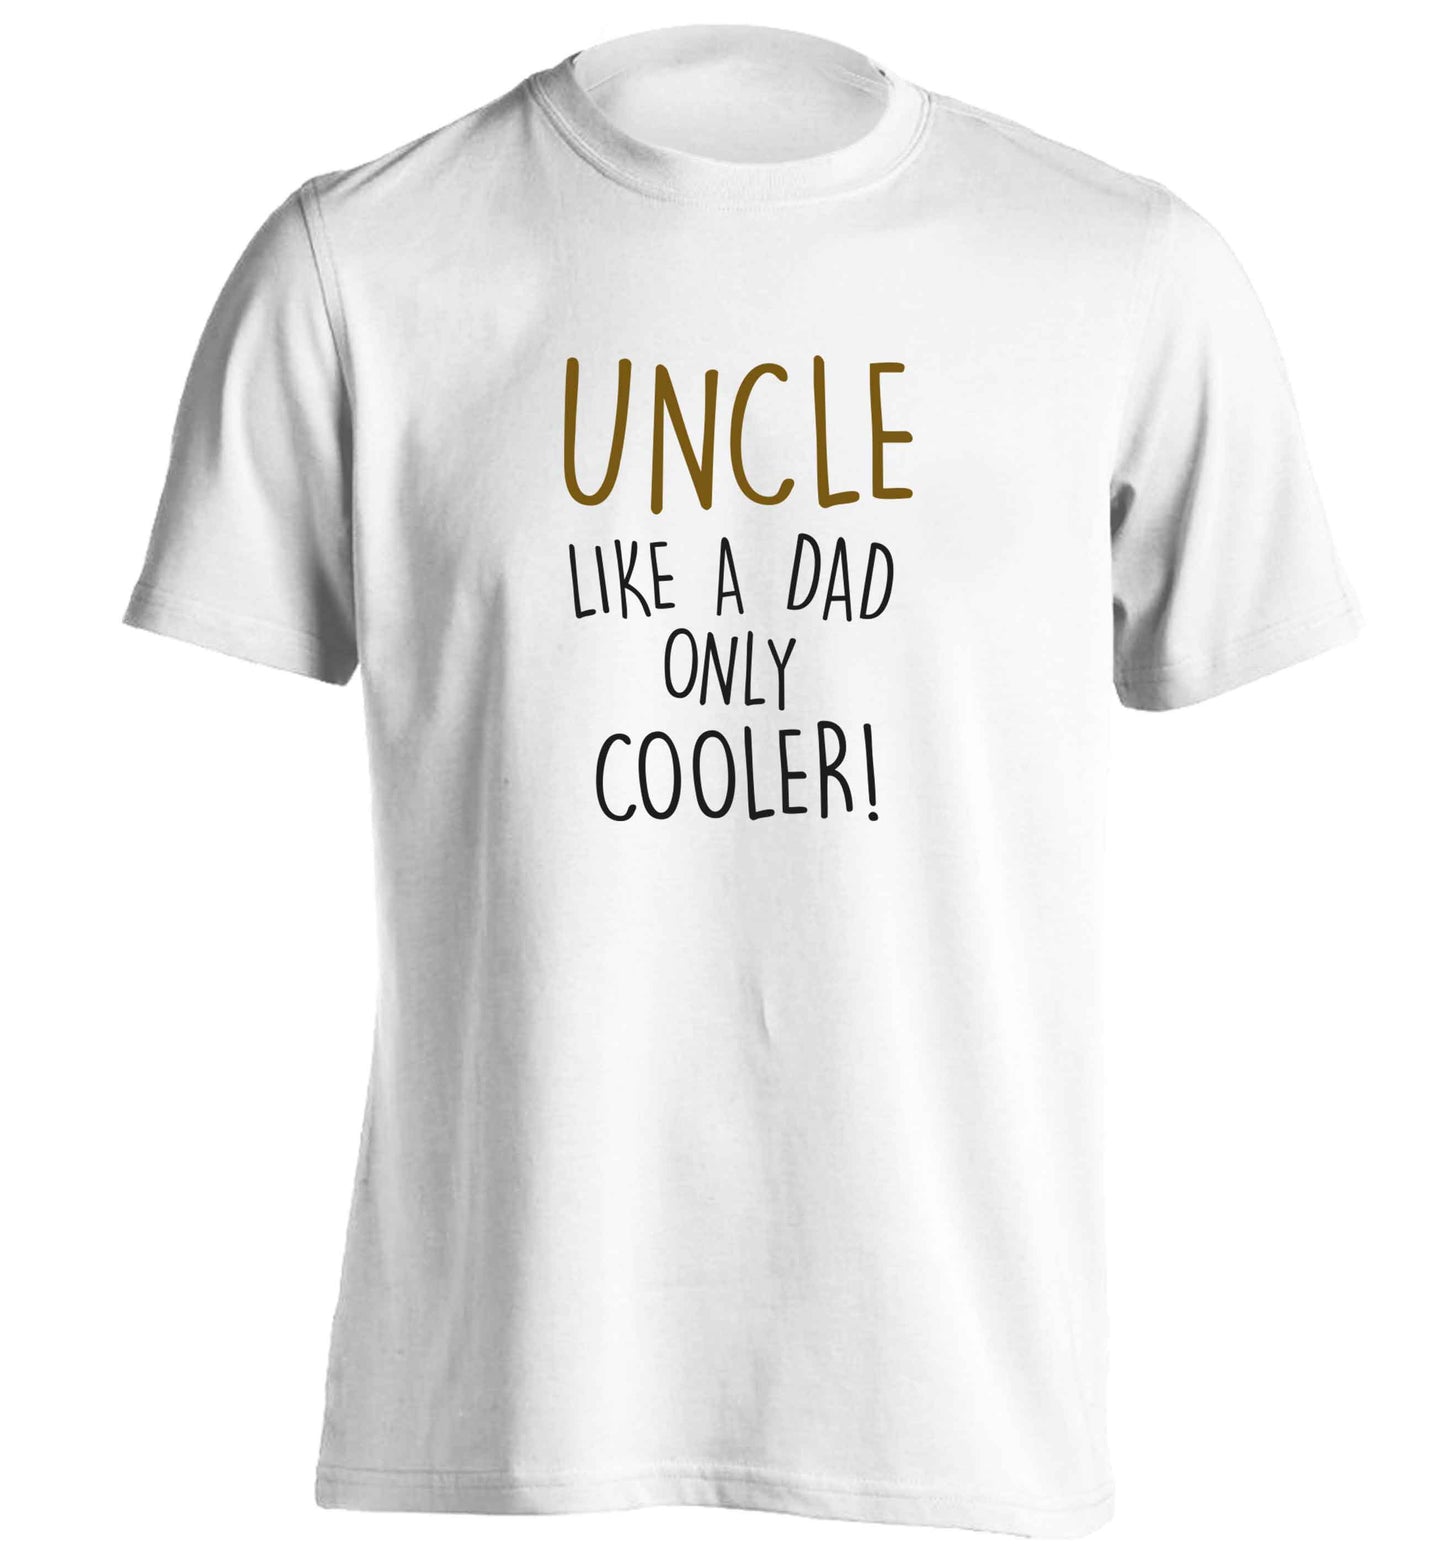 Uncle like a dad only cooler adults unisex white Tshirt 2XL